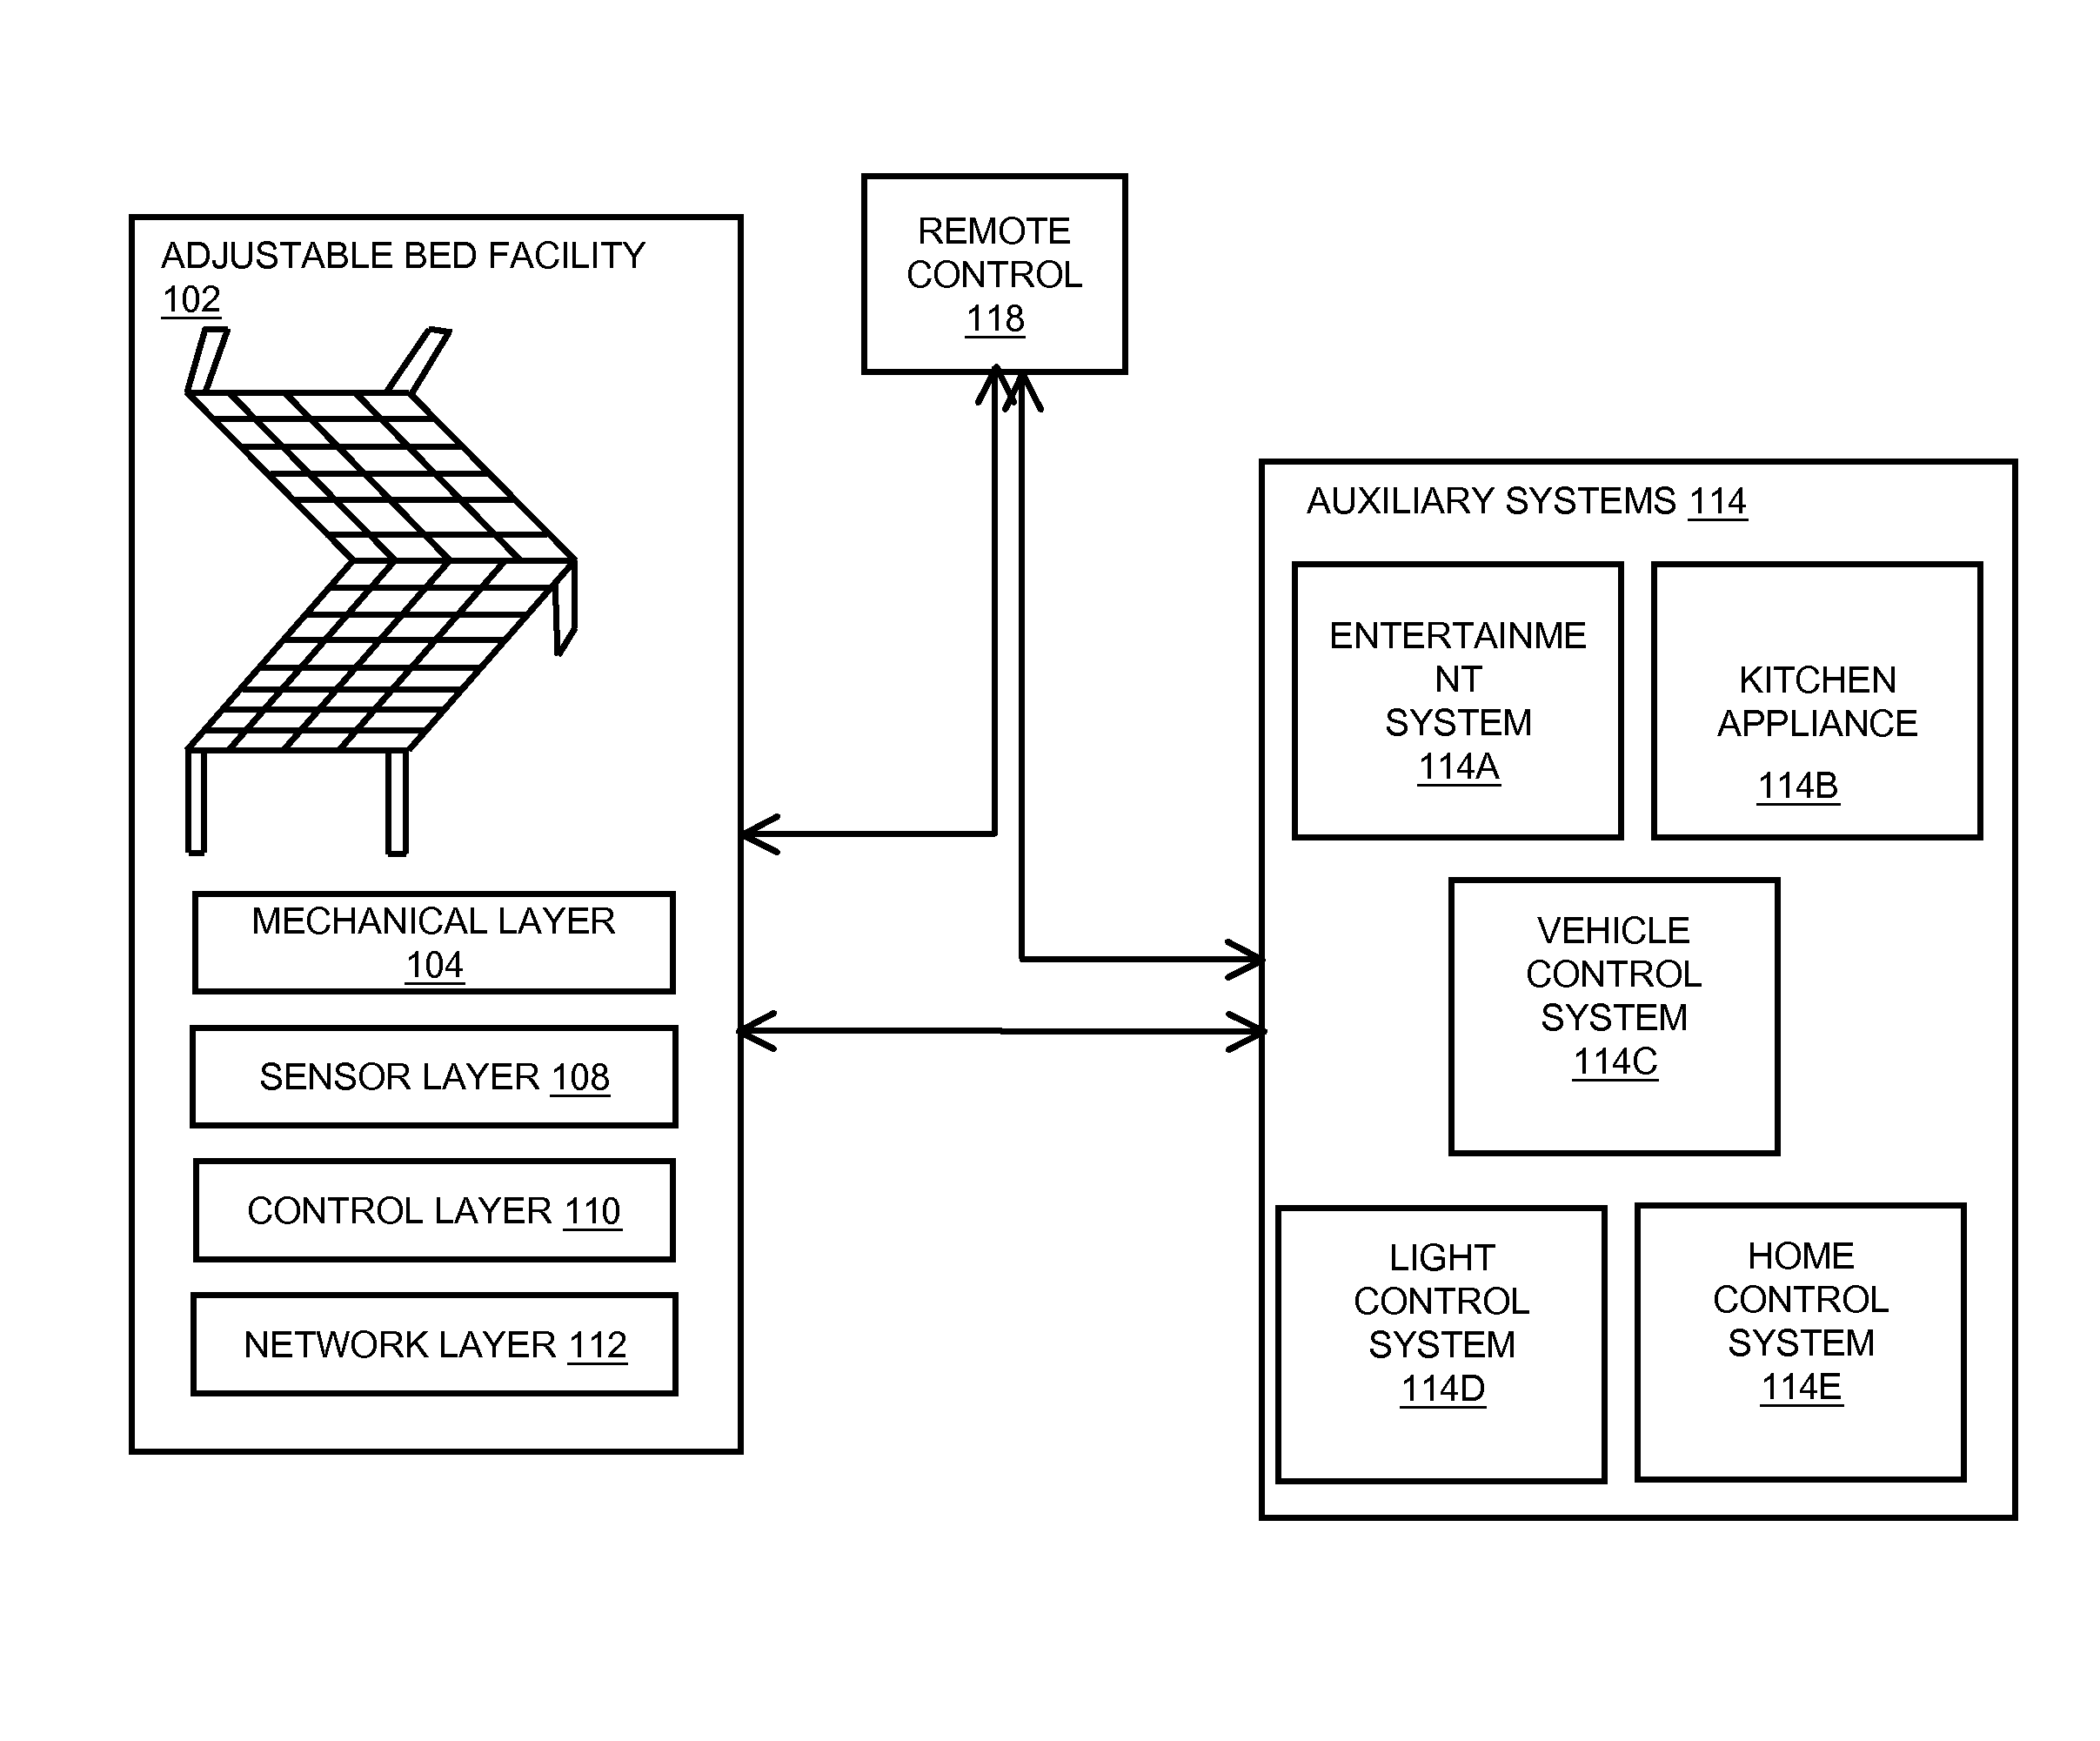 Closed feedback loop for touch screen of an adjustable bed